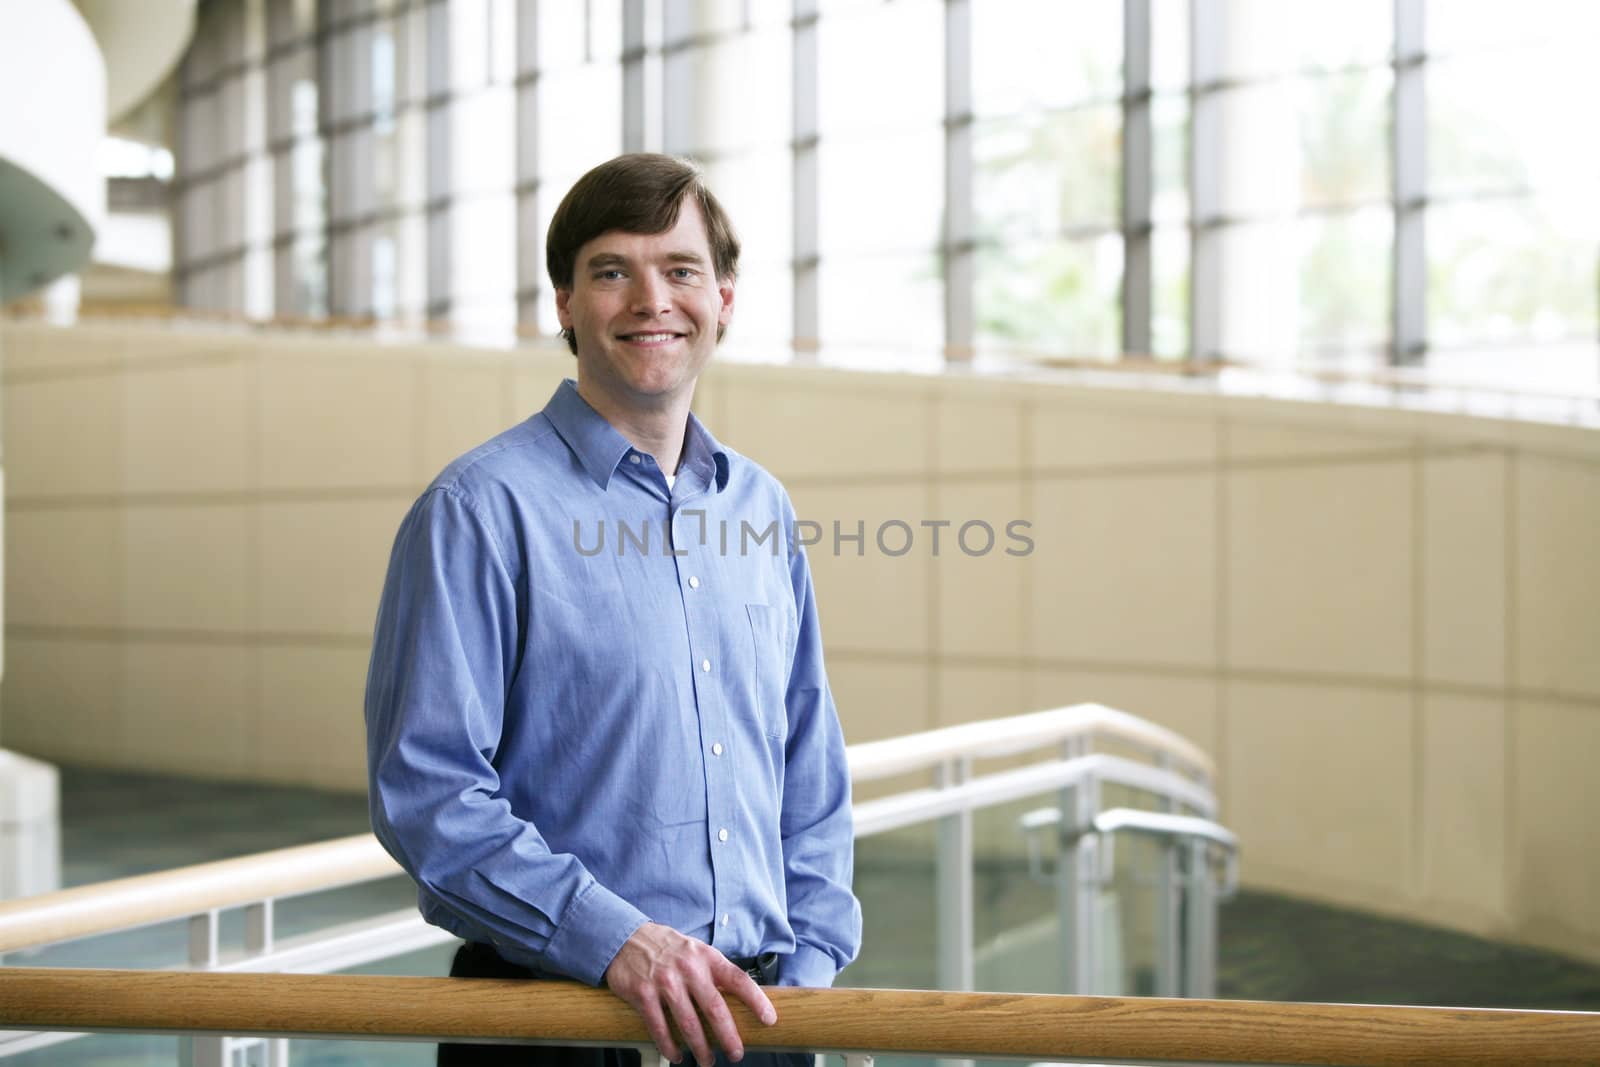 Handsome businessman leaning on railing in large office complex